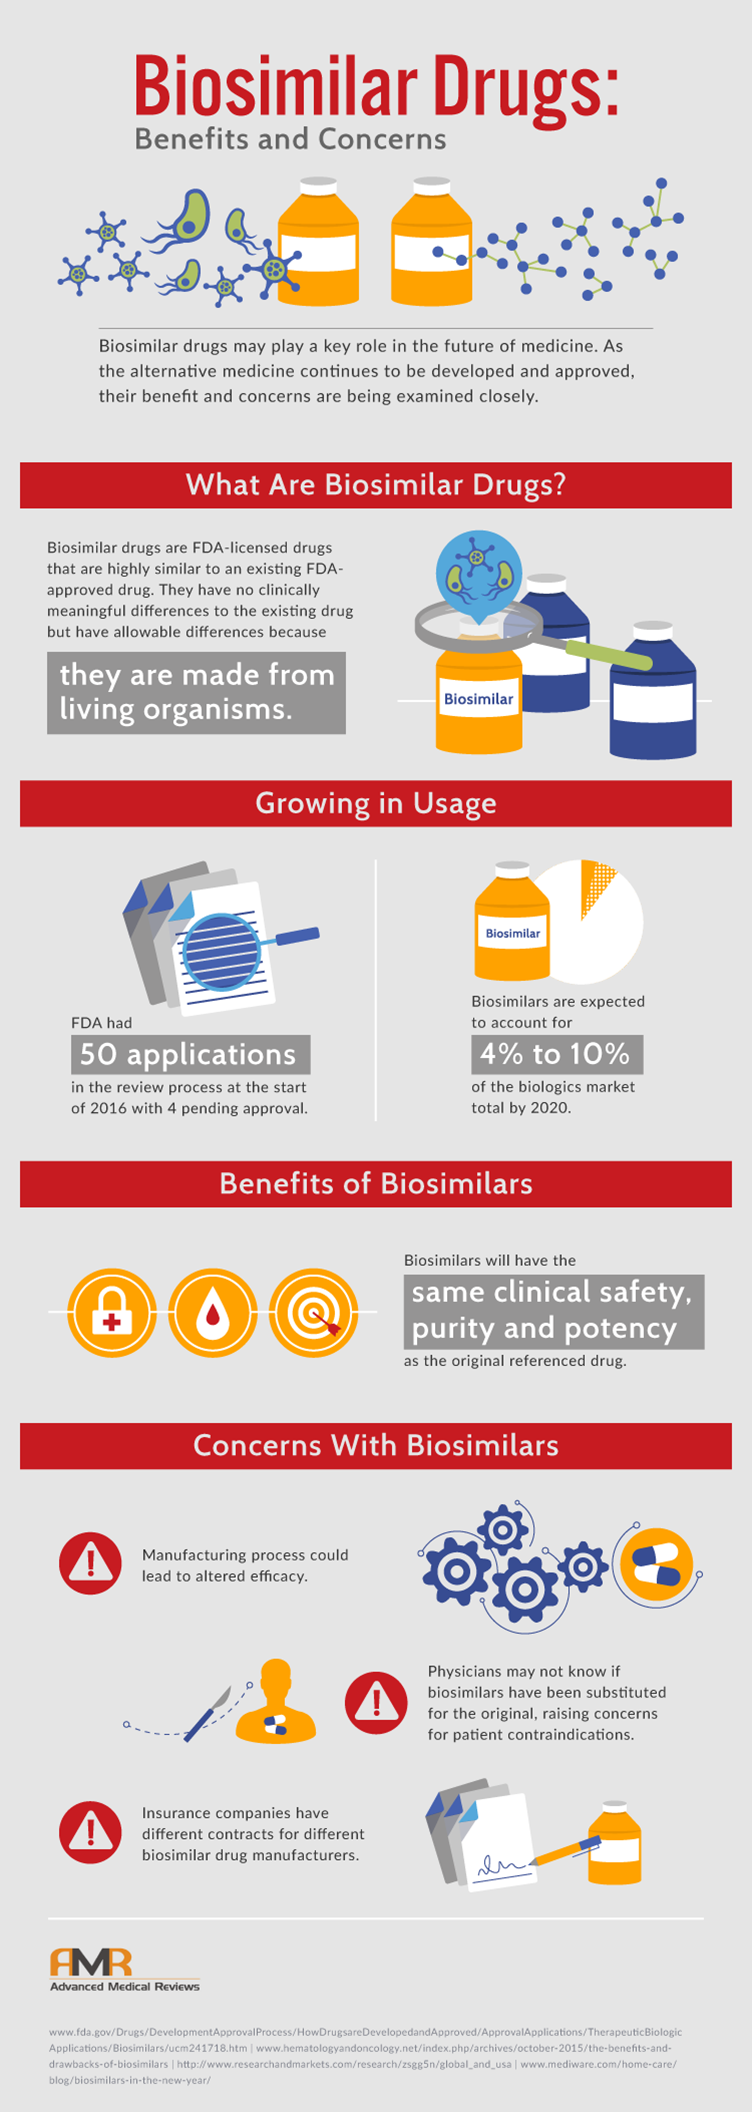 Infographic showing the benefits and concerns of biosimilar drugs.